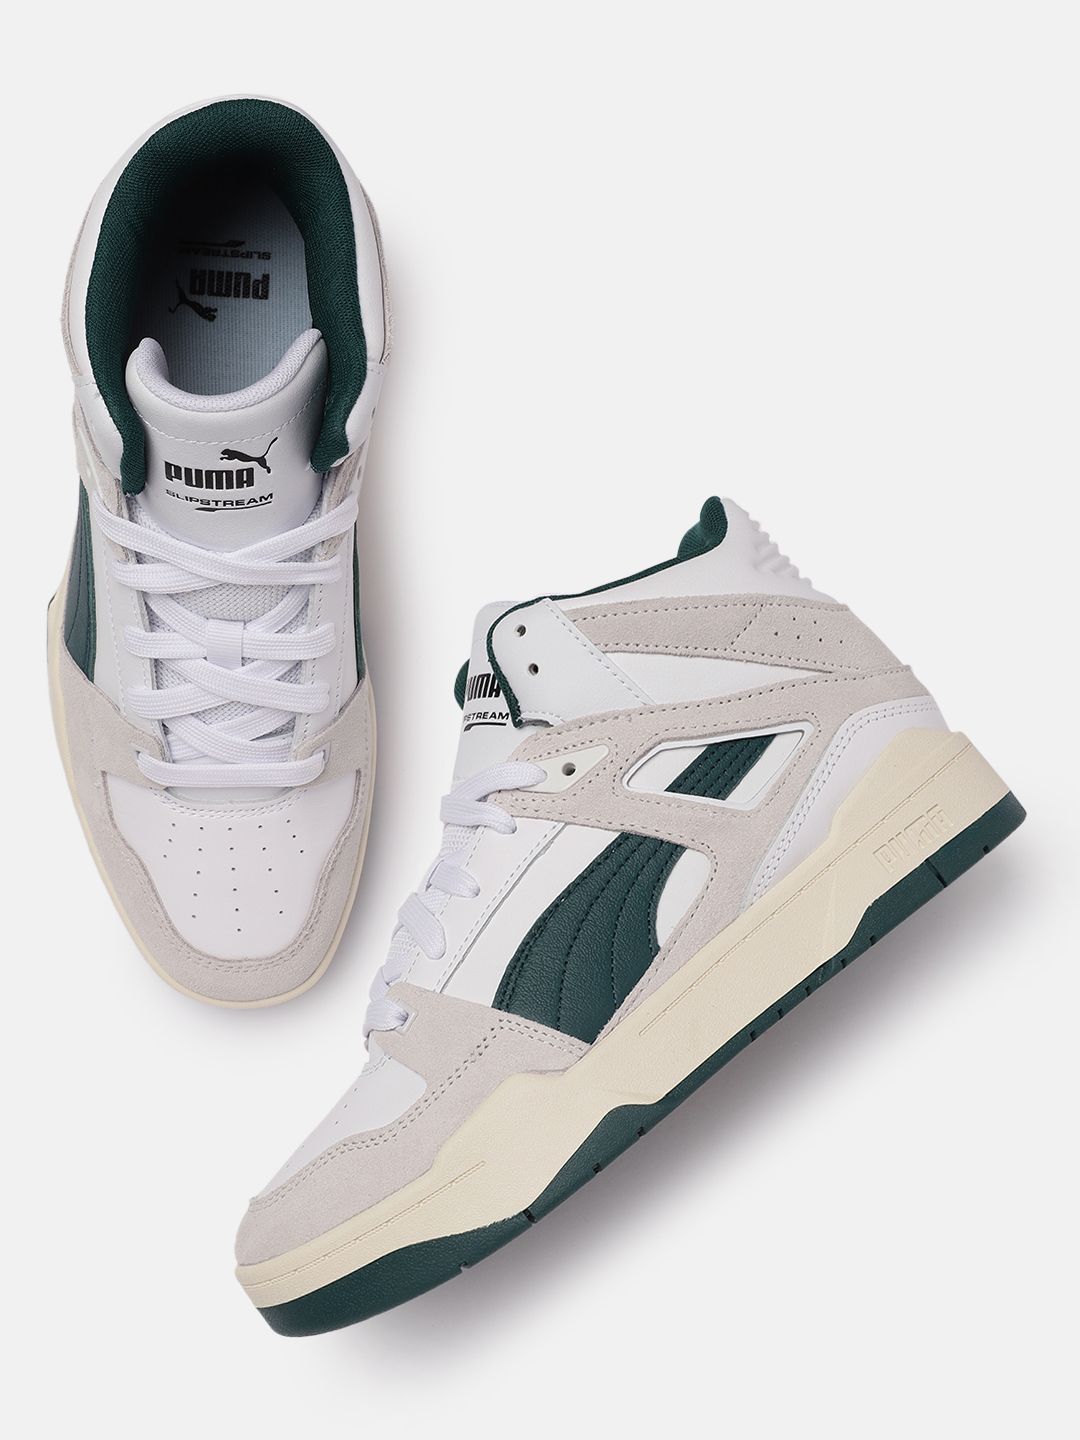 Puma Unisex White & Green Slipstream Heritage Colourblocked Mid-Top Leather Sneakers Price in India